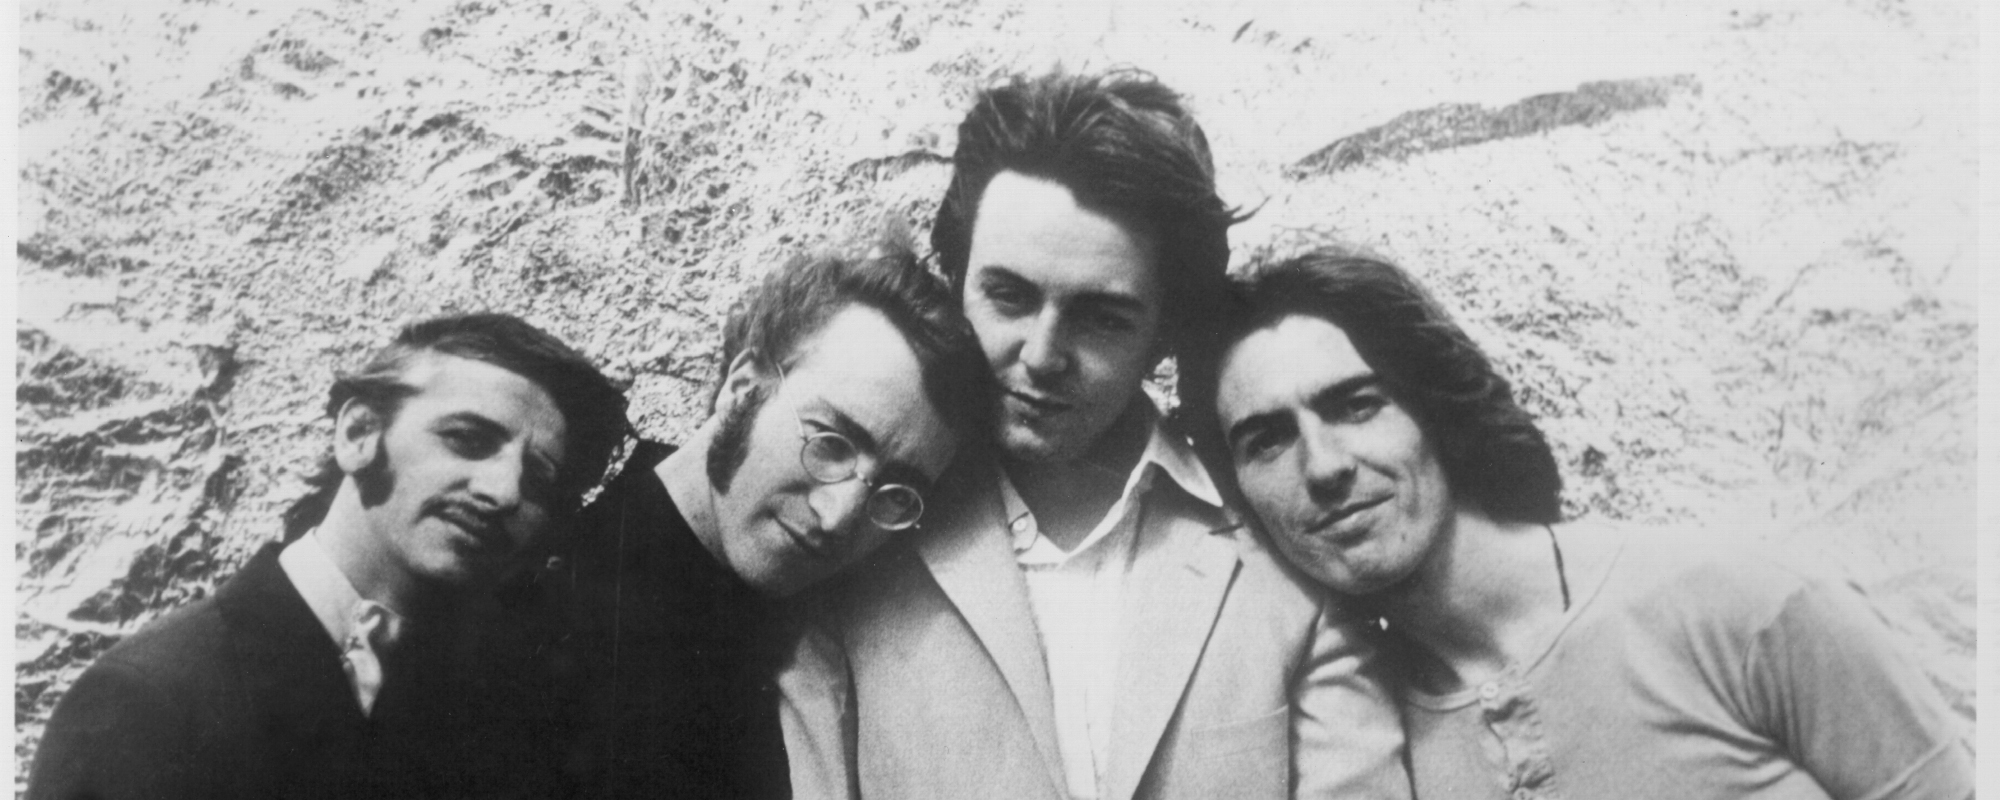 Final Fab Four: The Beatles’ “Last Song,” “Now and Then,” to Be Released Next Week